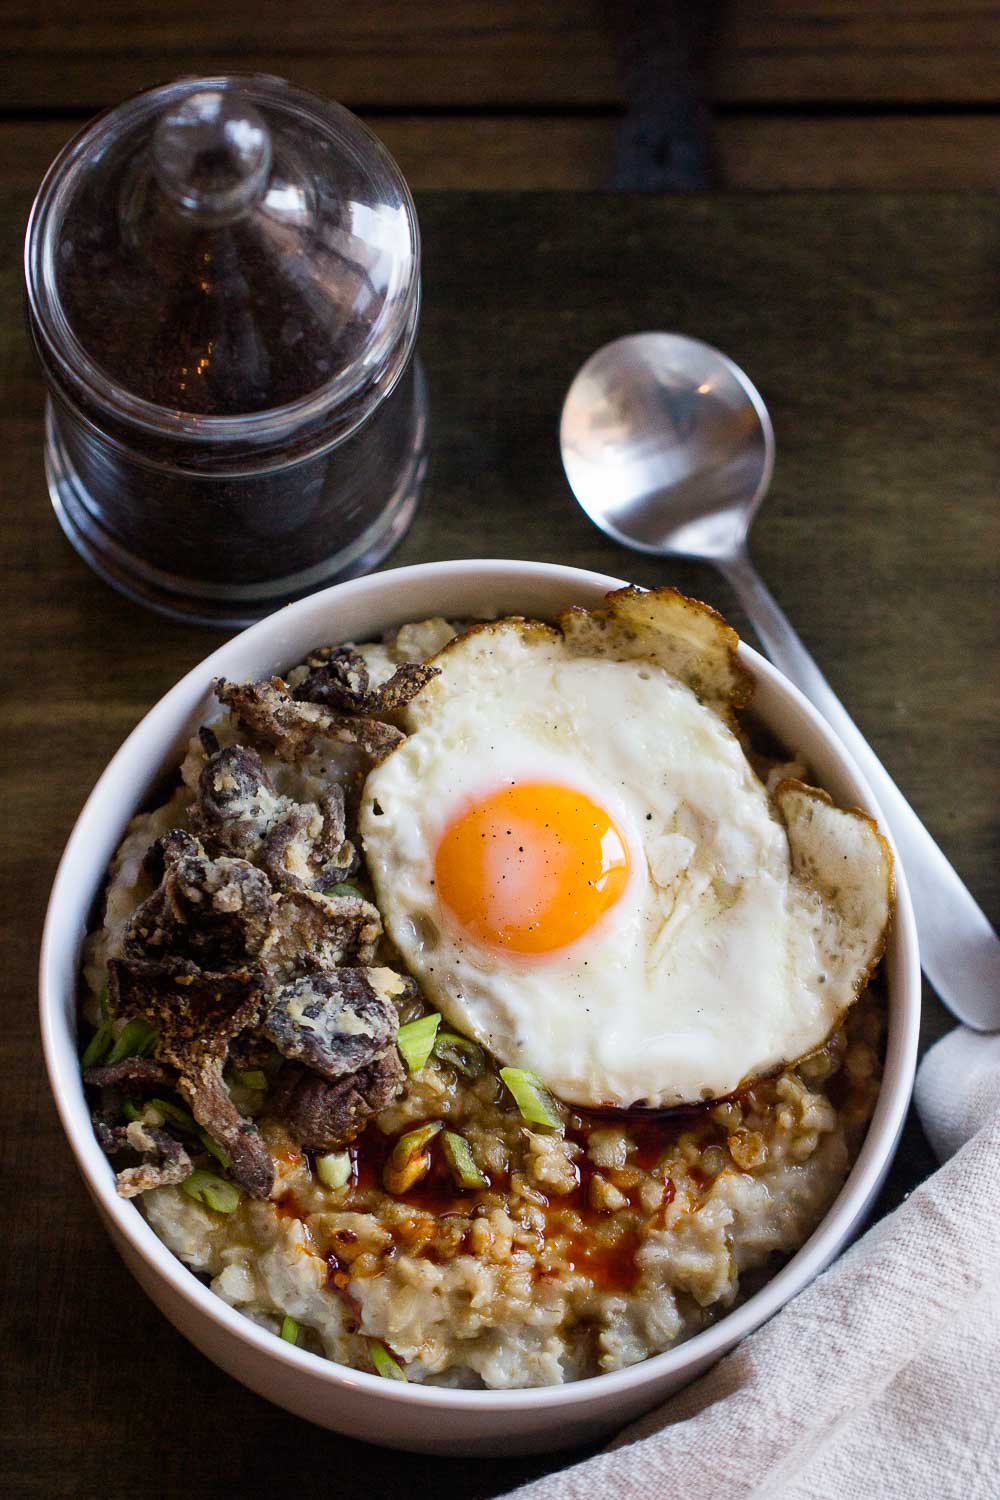 Winter comfort food that is healthy and satisfying - Mushroom Ginger Oatmeal Congee. This recipe requires minimal preparation and can be ready in less than 20 minutes. Perfect for cold & flu season!